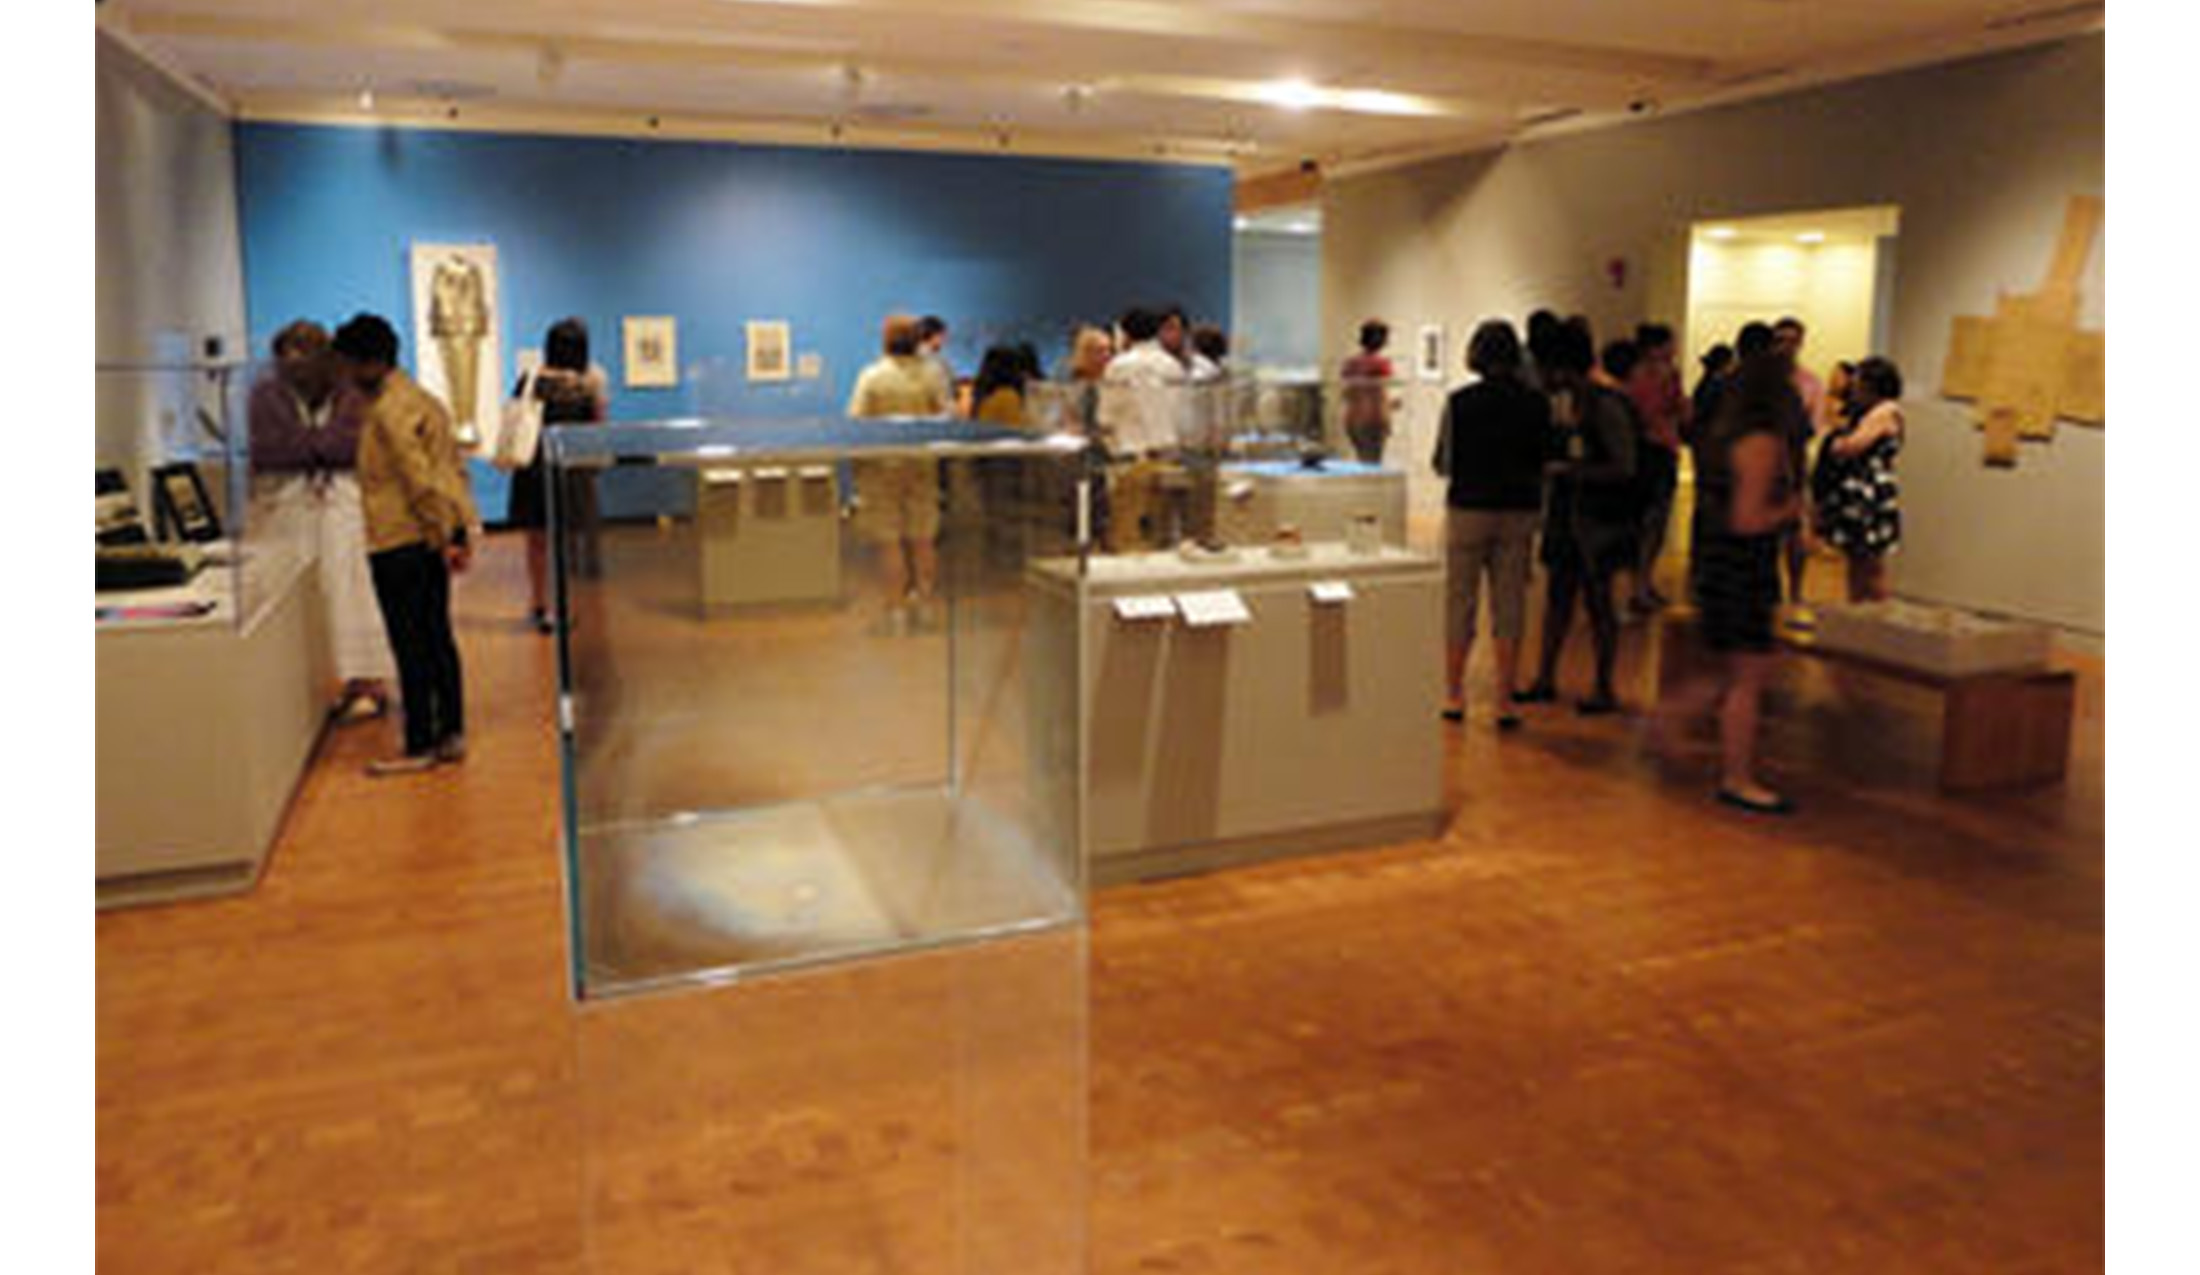 art gallery full of visitors looking at various display cabinets